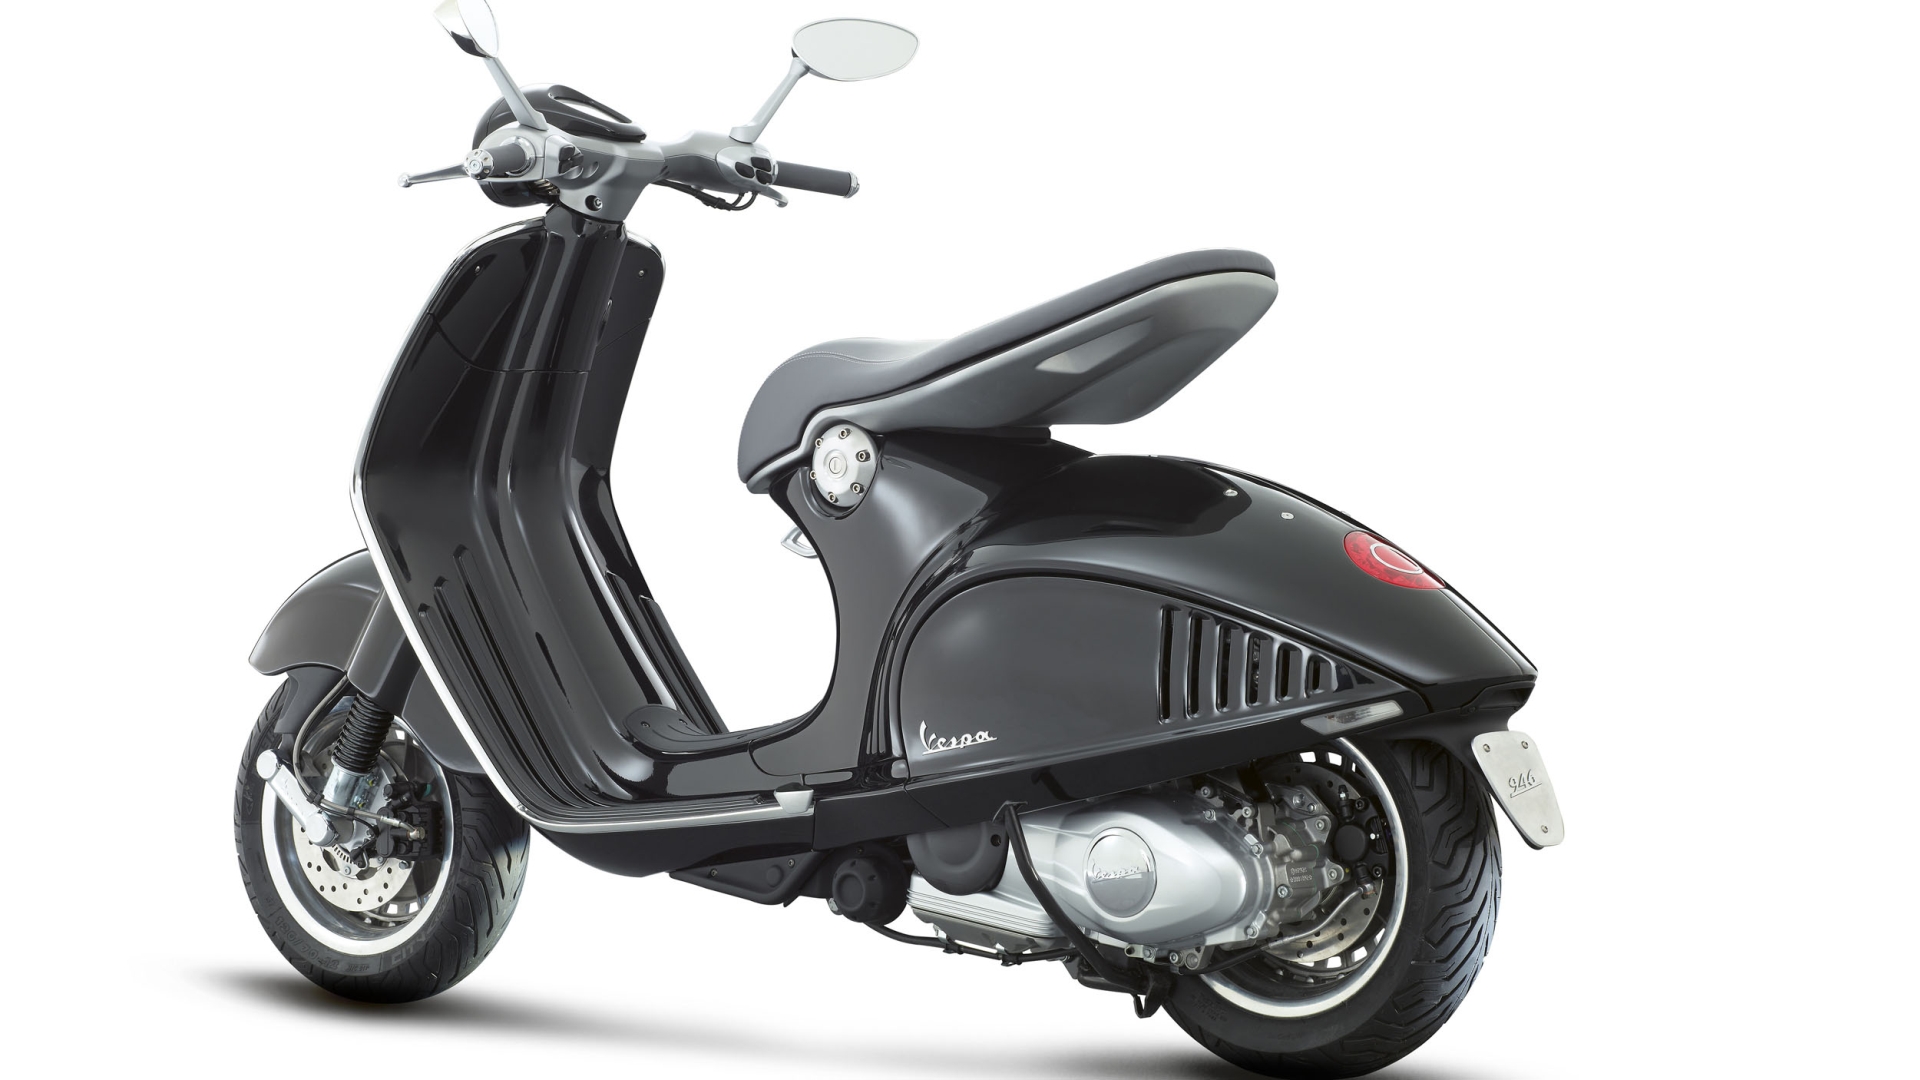 2013 Vespa 946, a Modern Tribute to the Scooters of Yore - autoevolution